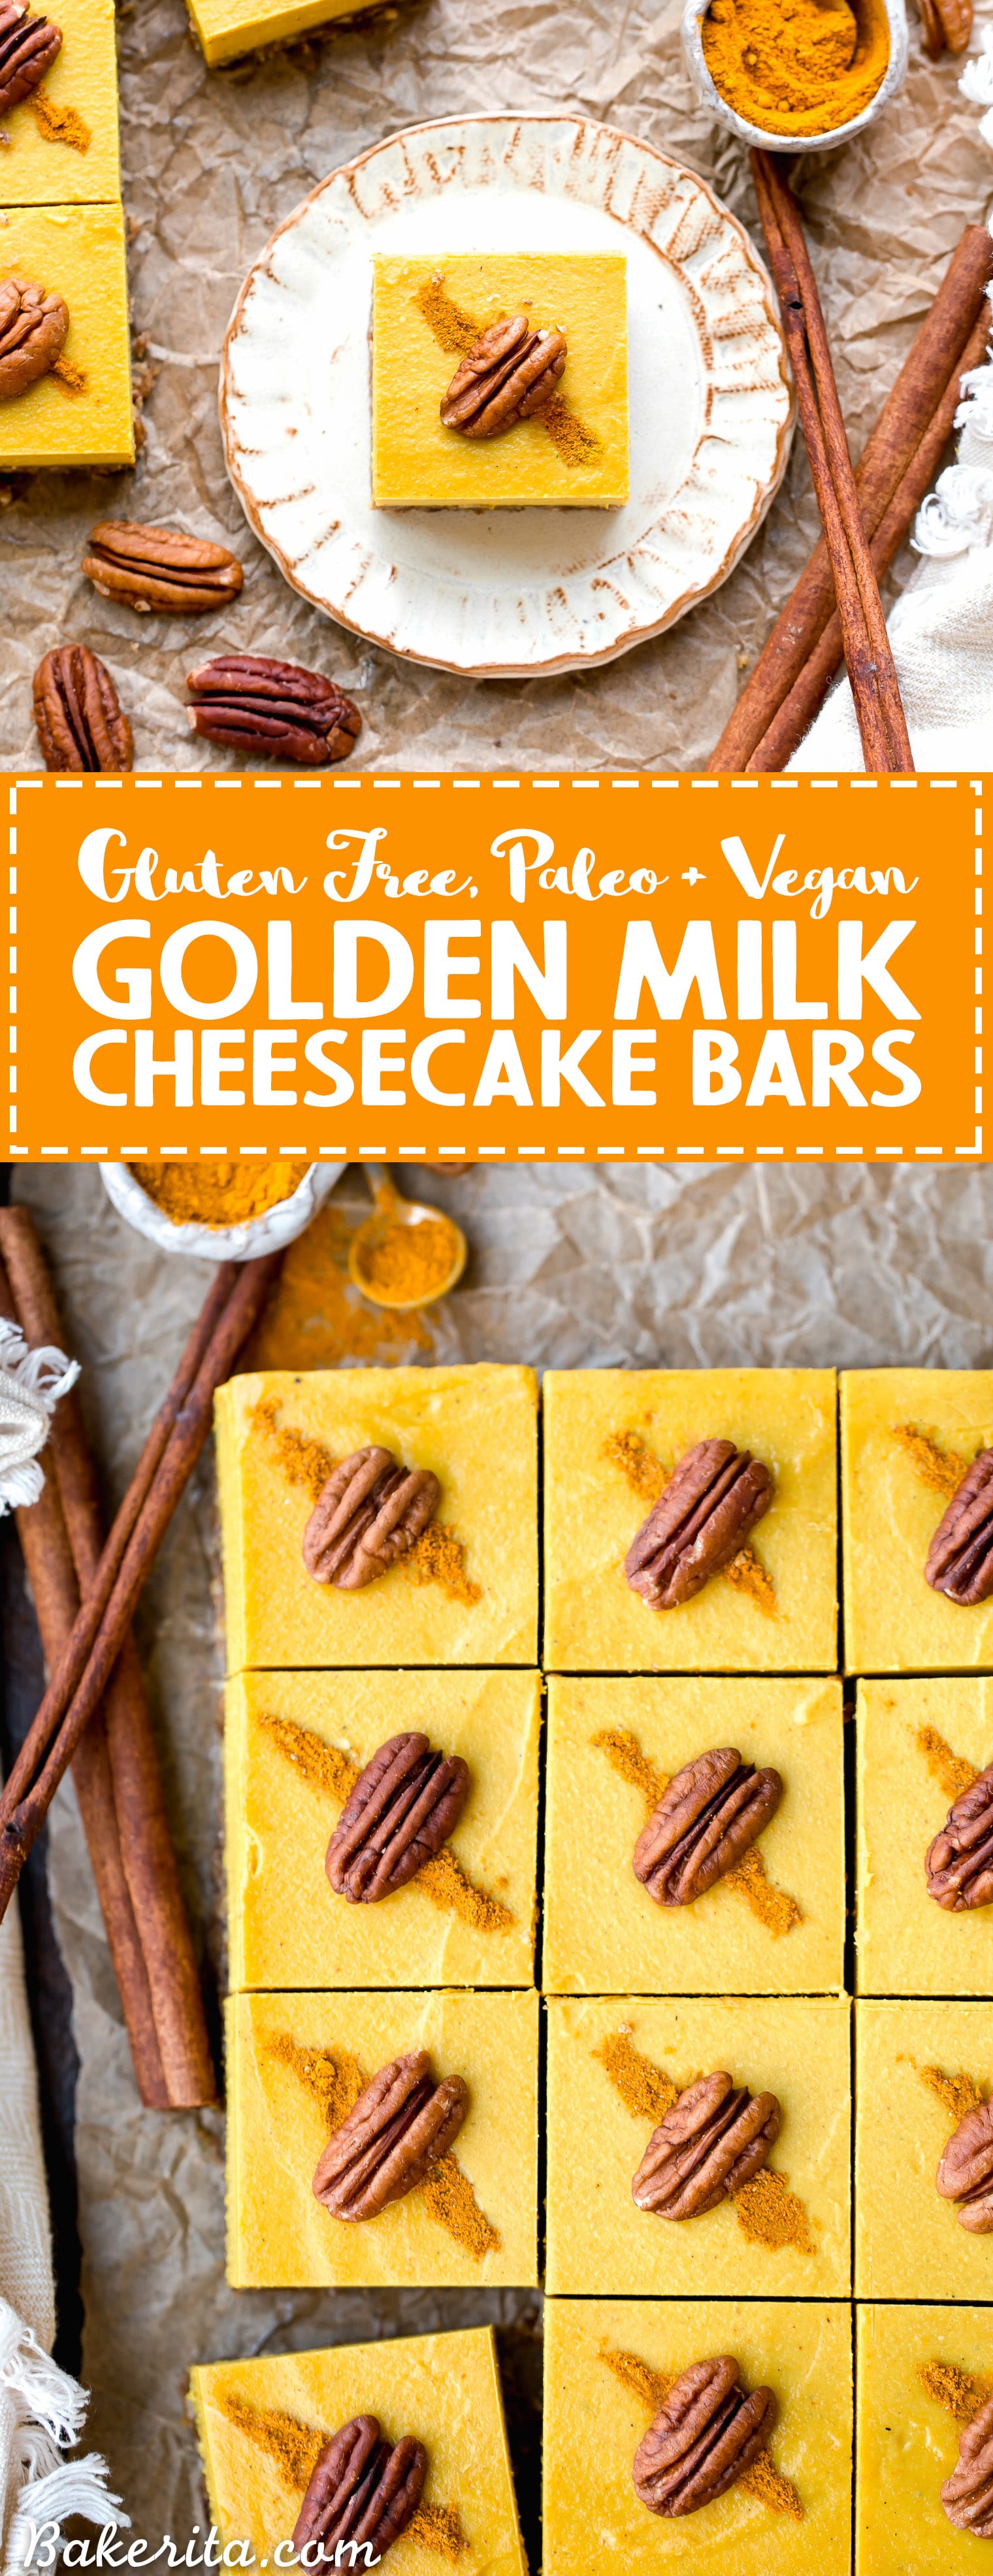 These No Bake Golden Milk Cheesecake Bars are a dessert that's loaded with the anti-inflammatory benefits of turmeric and the warmth and comfort of golden milk. They're deliciously spiced, gluten-free, paleo, vegan, and perfect for sharing.